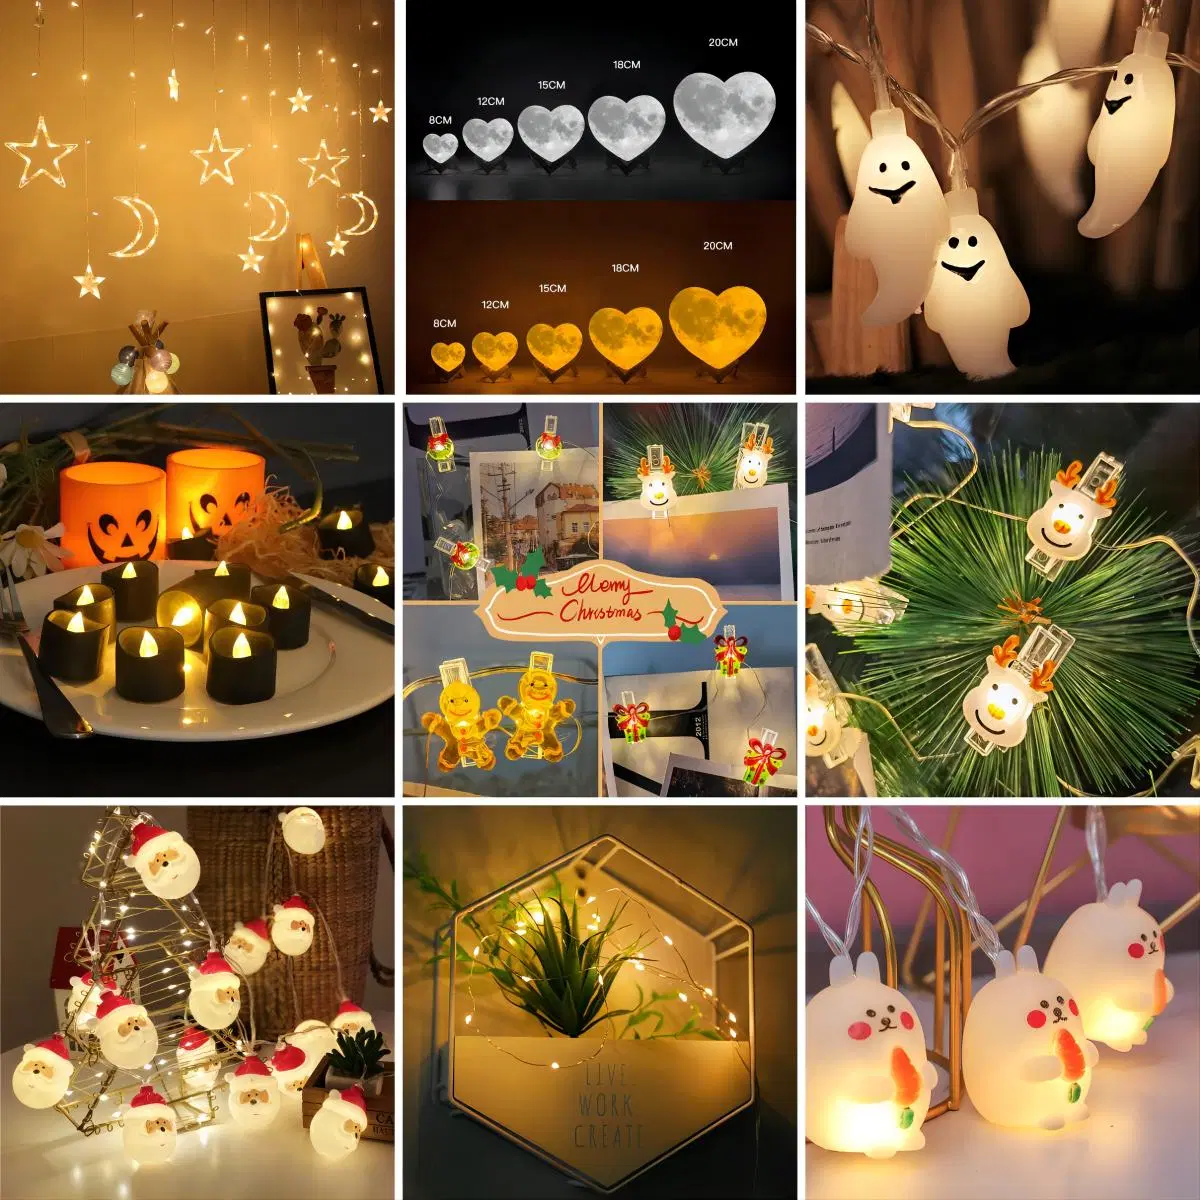 China Wholesale/Supplier Price Outdoor Christmas Light Decorations Outdoor Christmas Decorations Christmas Light up Decorations Christmas Decorations Decoration Light